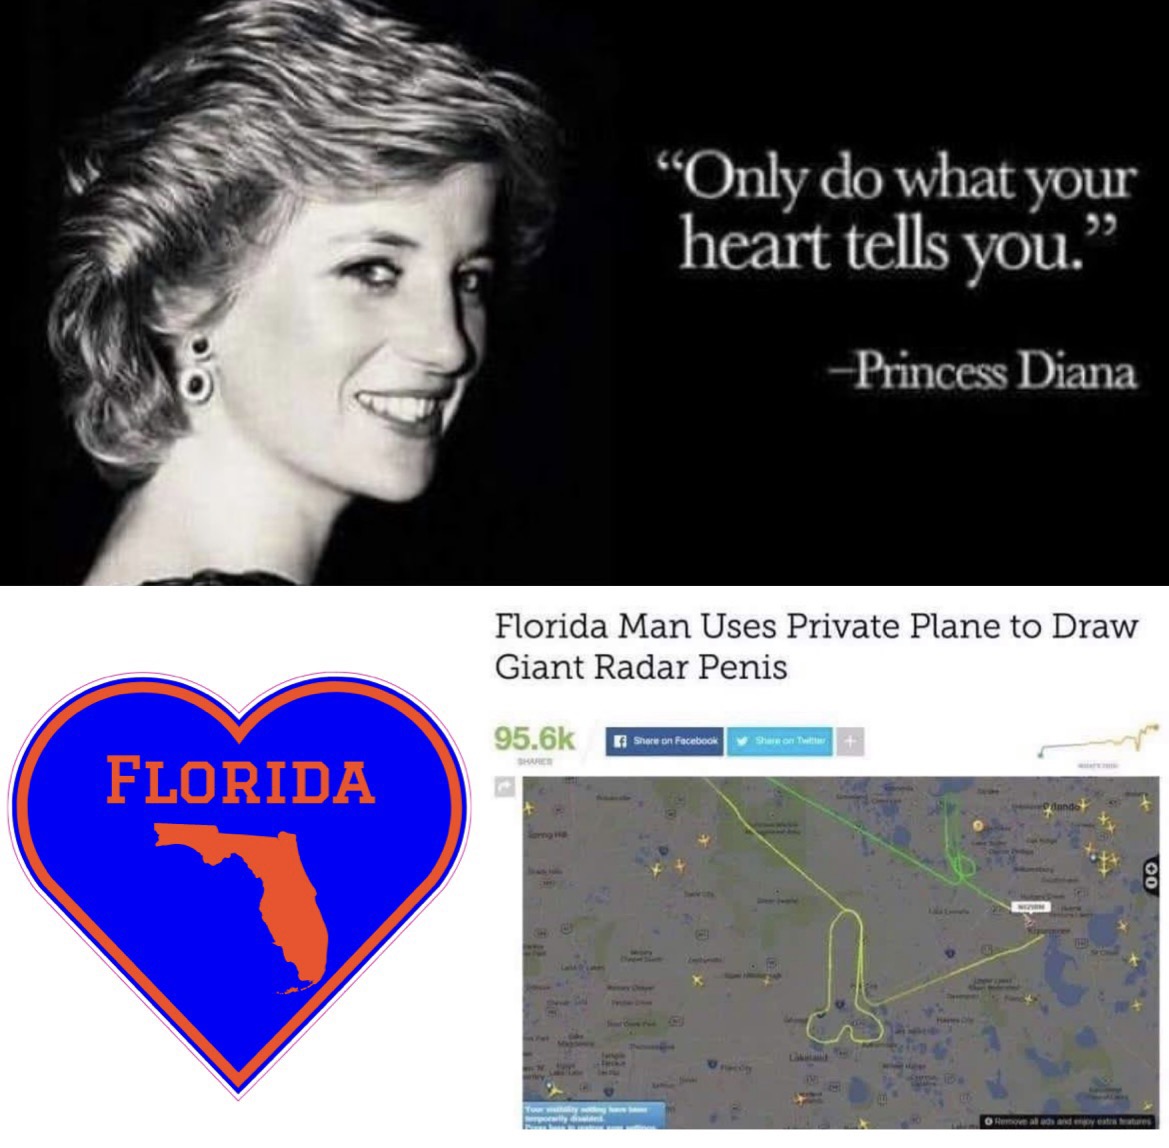 "Only do what your heart tells you." Princess Diana Florida Man Uses Private Plane to Draw Giant Radar Penis on Facebook Show on Twith Sh Florida malas anderes